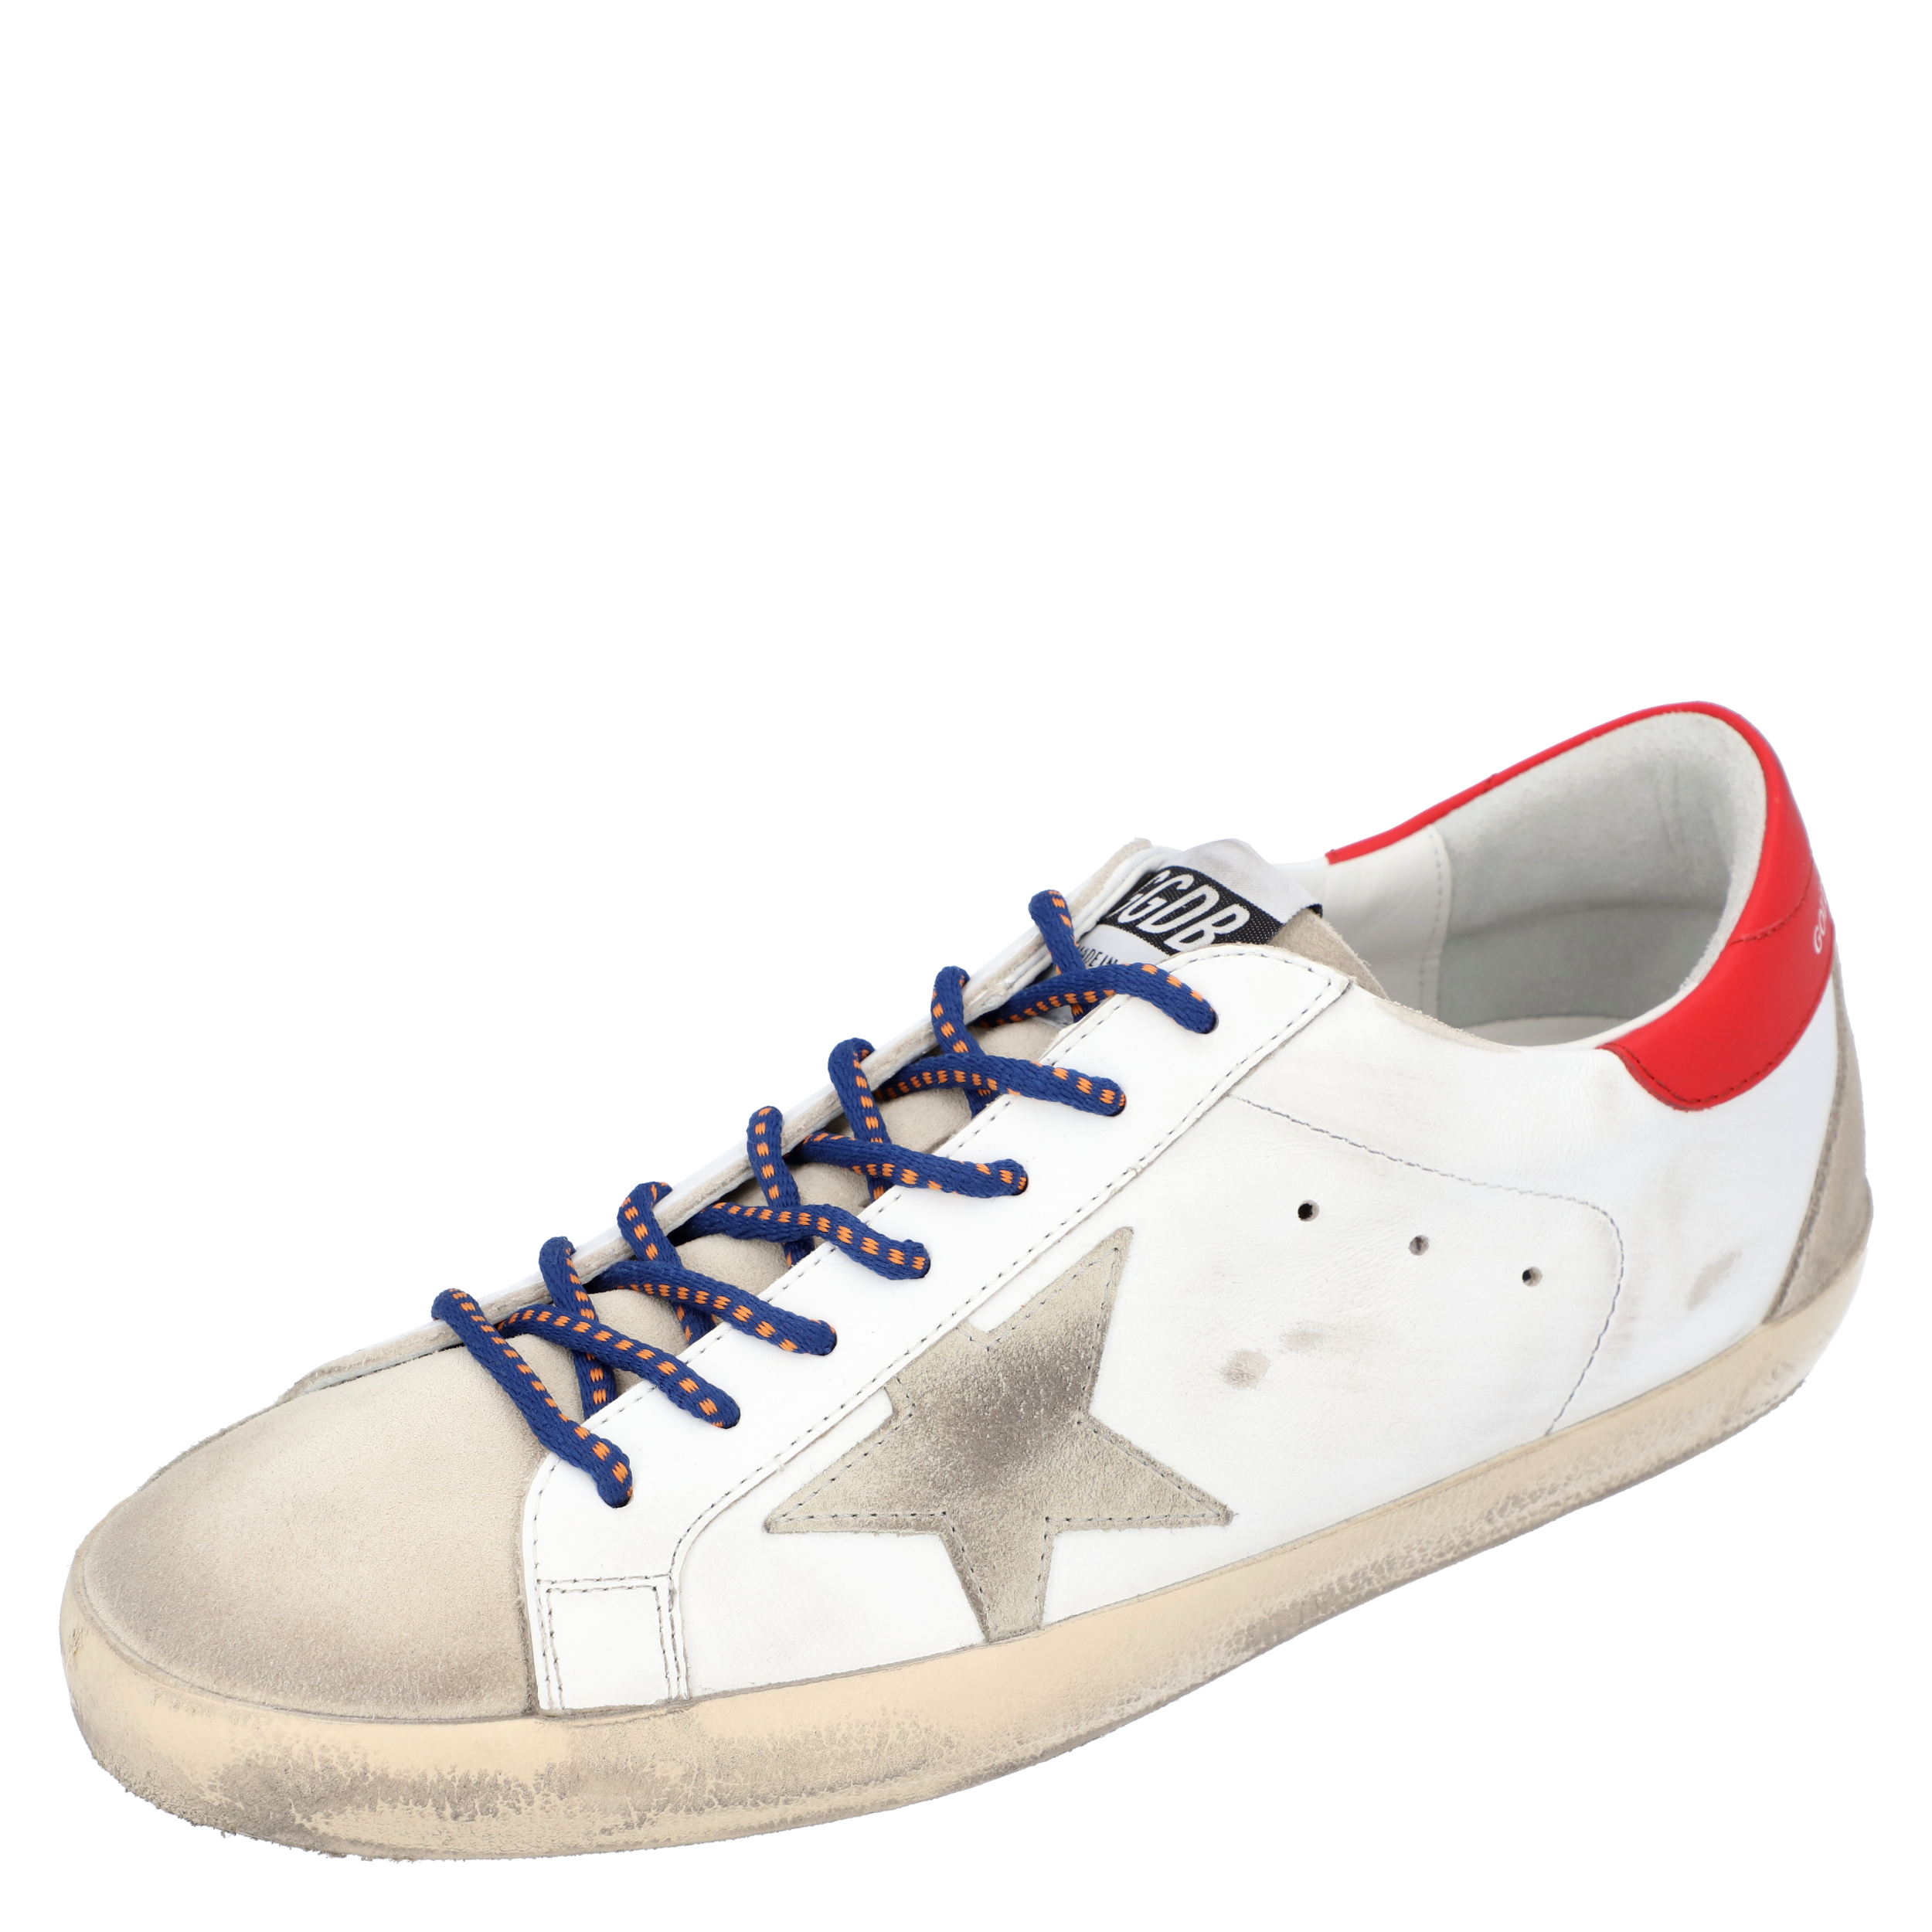 Golden Goose White/Red Leather Superstar Sneakers Size EU 40